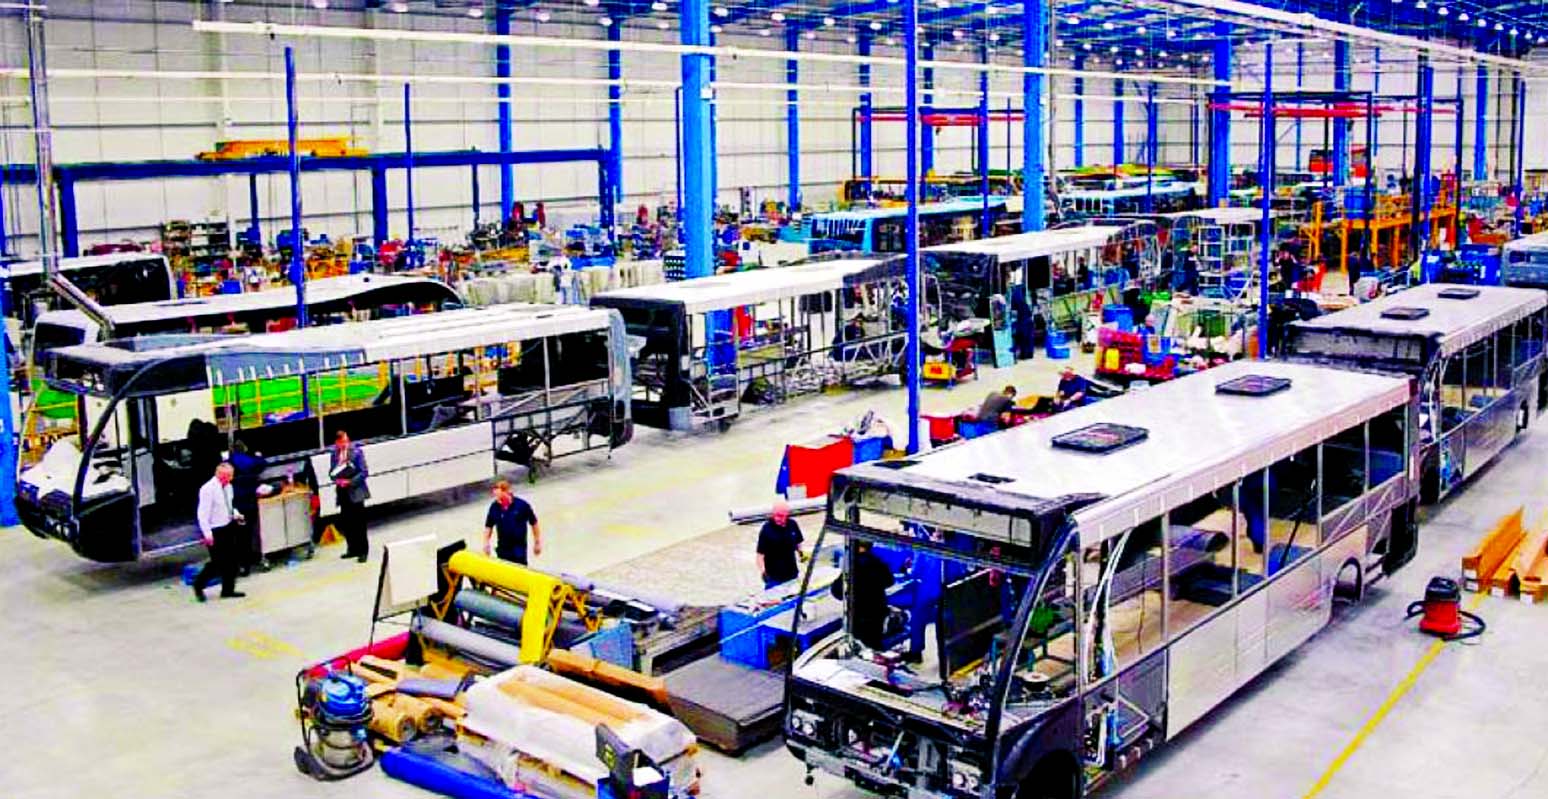 DIVC Daimler India Commercial Vehicles (DICV) will invest Rs 2,277 crore to expand commercial vehicle production at its Oragadam plant near Chennai in Tamil Nadu.